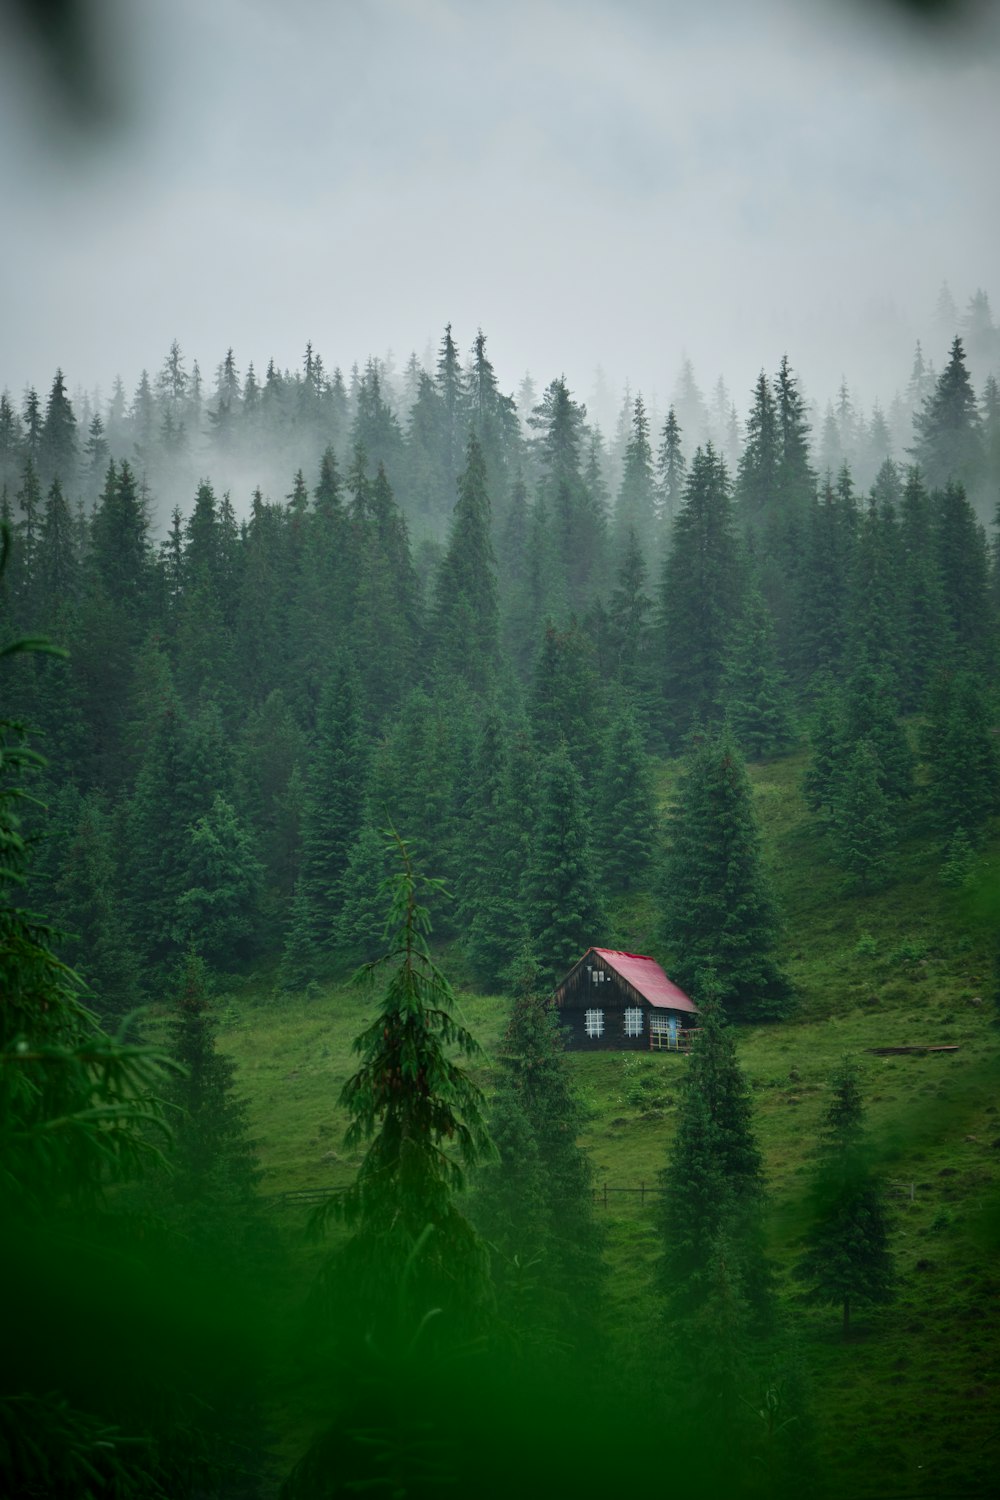 brown wooden house in the middle of green pine trees